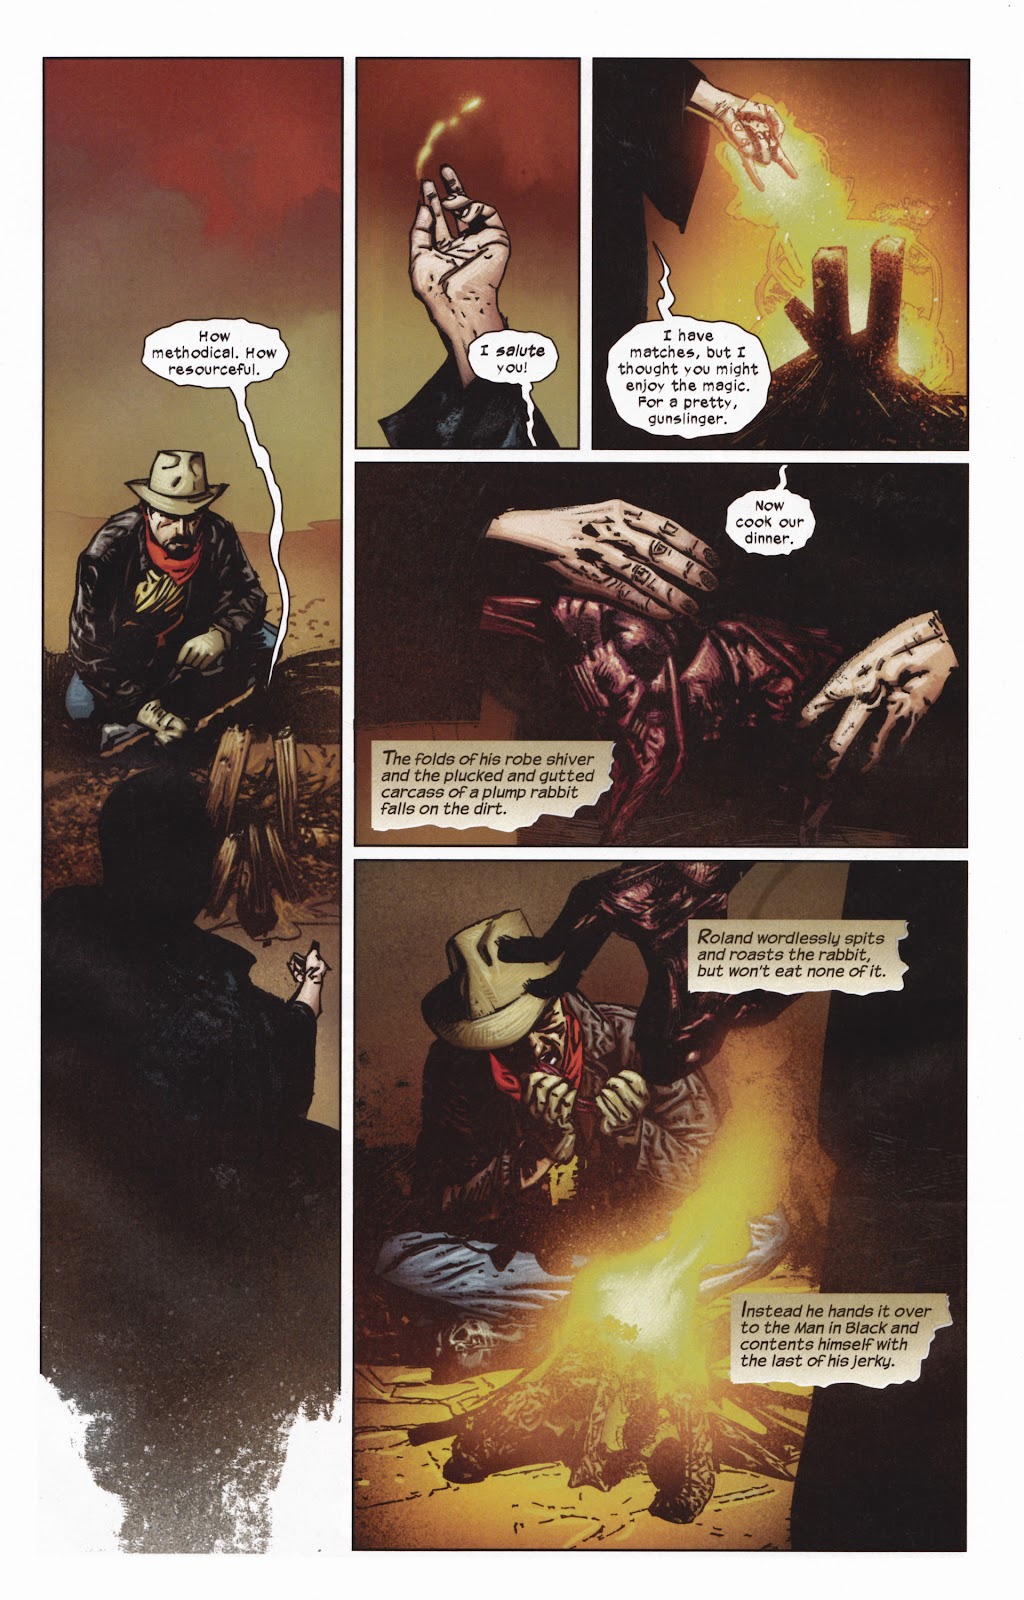 Dark Tower: The Gunslinger - The Man in Black issue 5 - Page 6